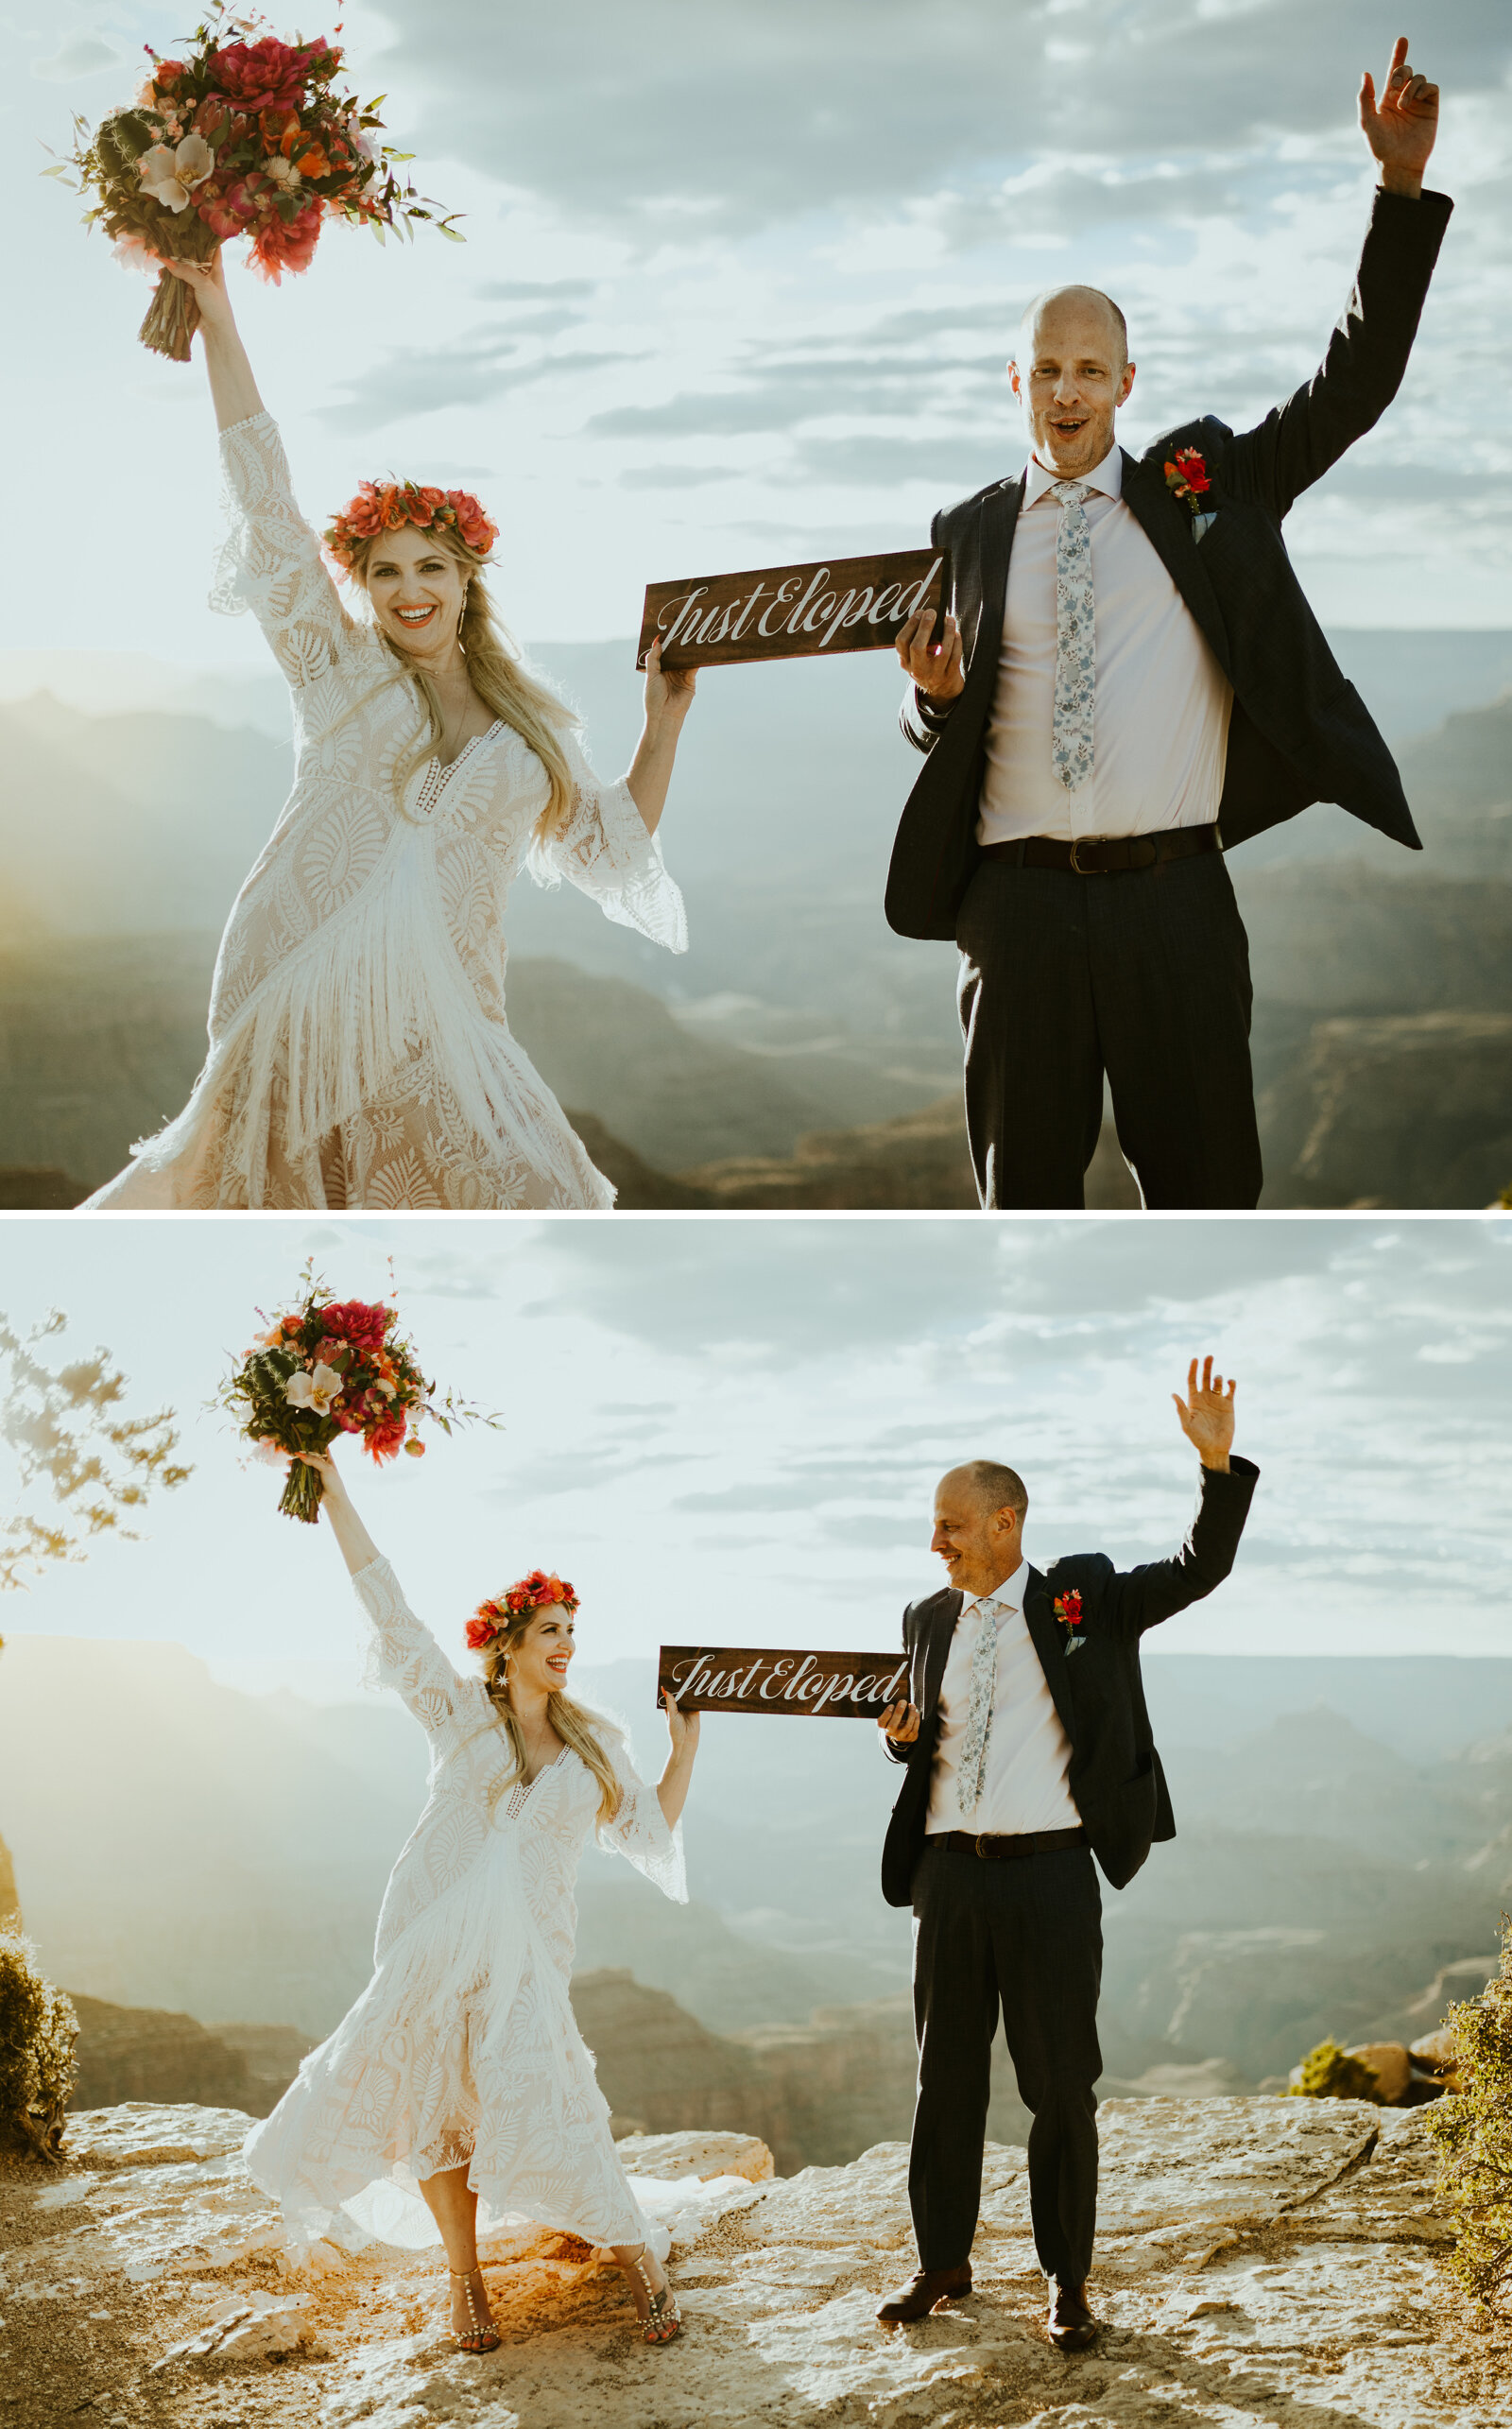 moran point grand canyon national park arizona elopement photography bibiluxe dress with fringe tassels boho bride inspiration boho wedding style inspo faux flowers fake wedding florals DIY dip dyed veil just eloped sign over the moon bridal.jpg